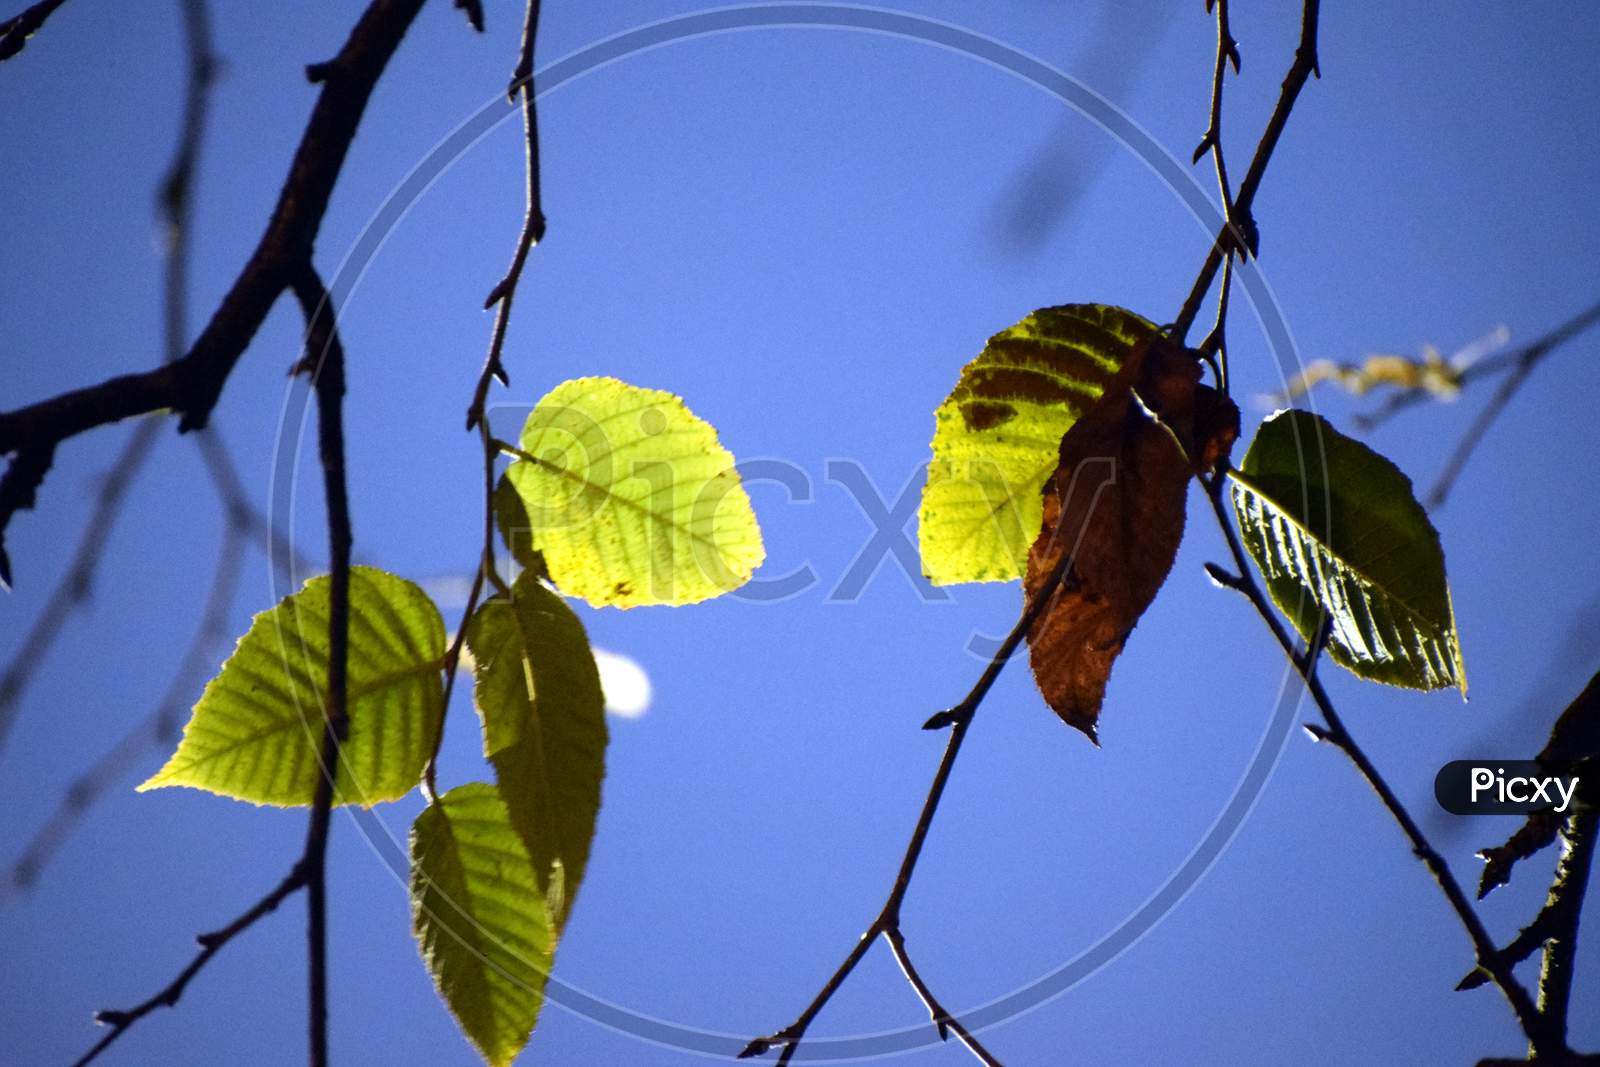 Beautiful Picture Of Green Leaf And Tree Branch. Blue Sky In Background. Selective Focus On Subject